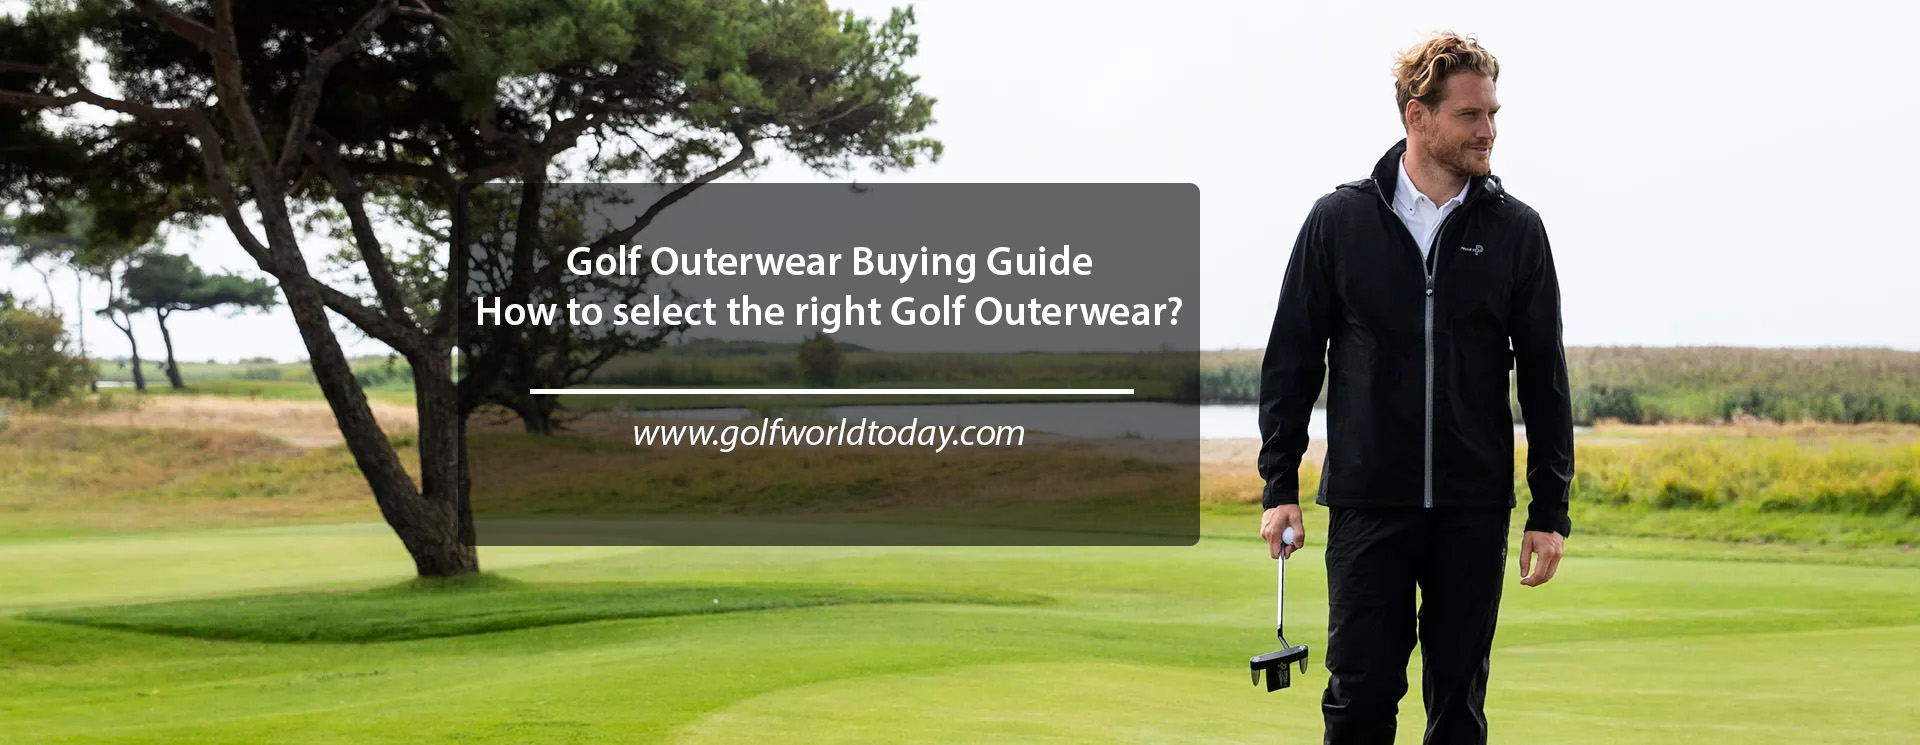 Golf Outerwear Buying Guide How to select the right Golf Outerwear?